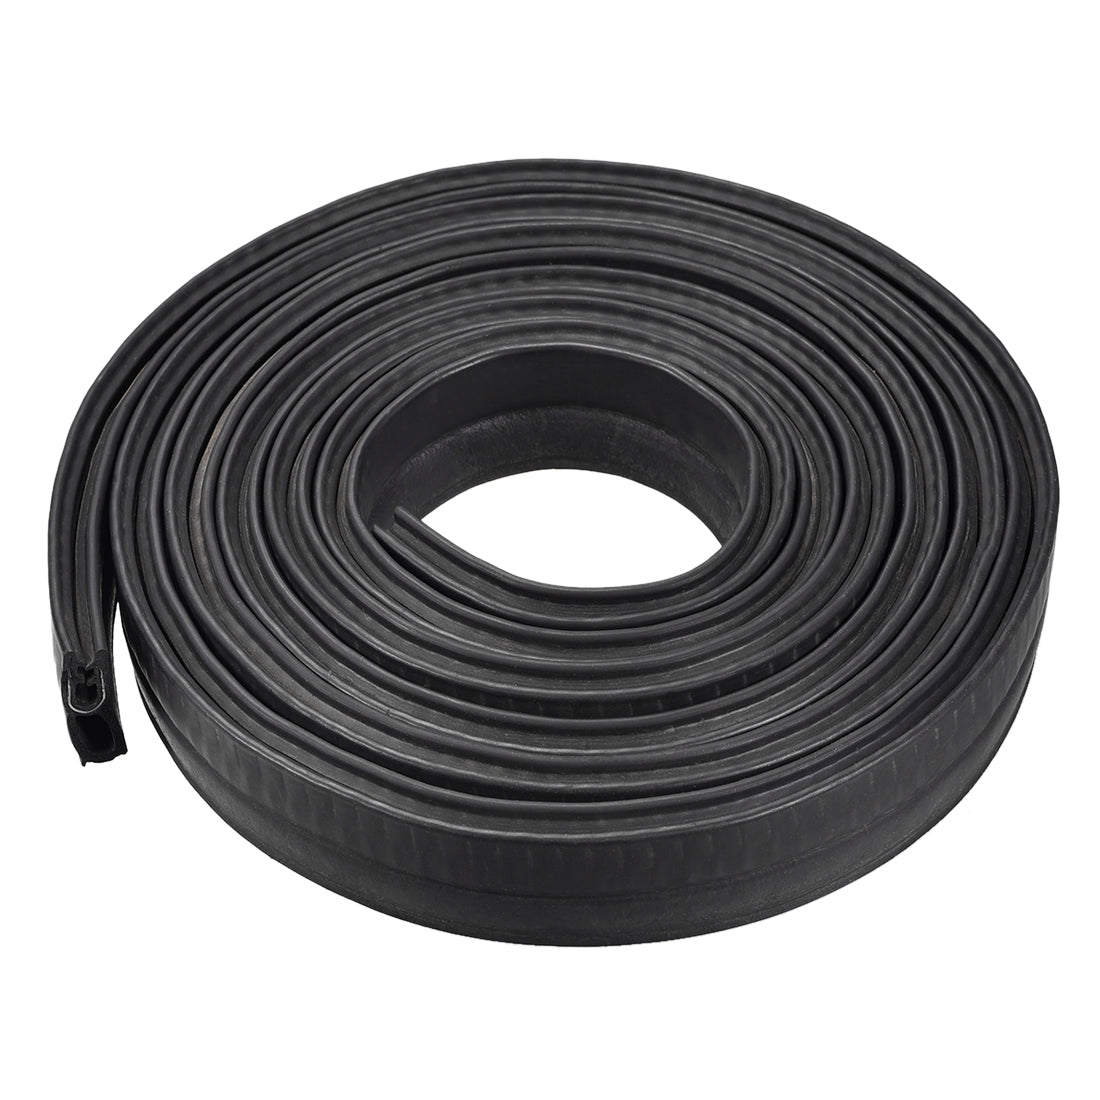 uxcell Uxcell Trim Seal with Top Bulb, EPDM Rubber Seal Channel Edge Protector Sheet, Fits